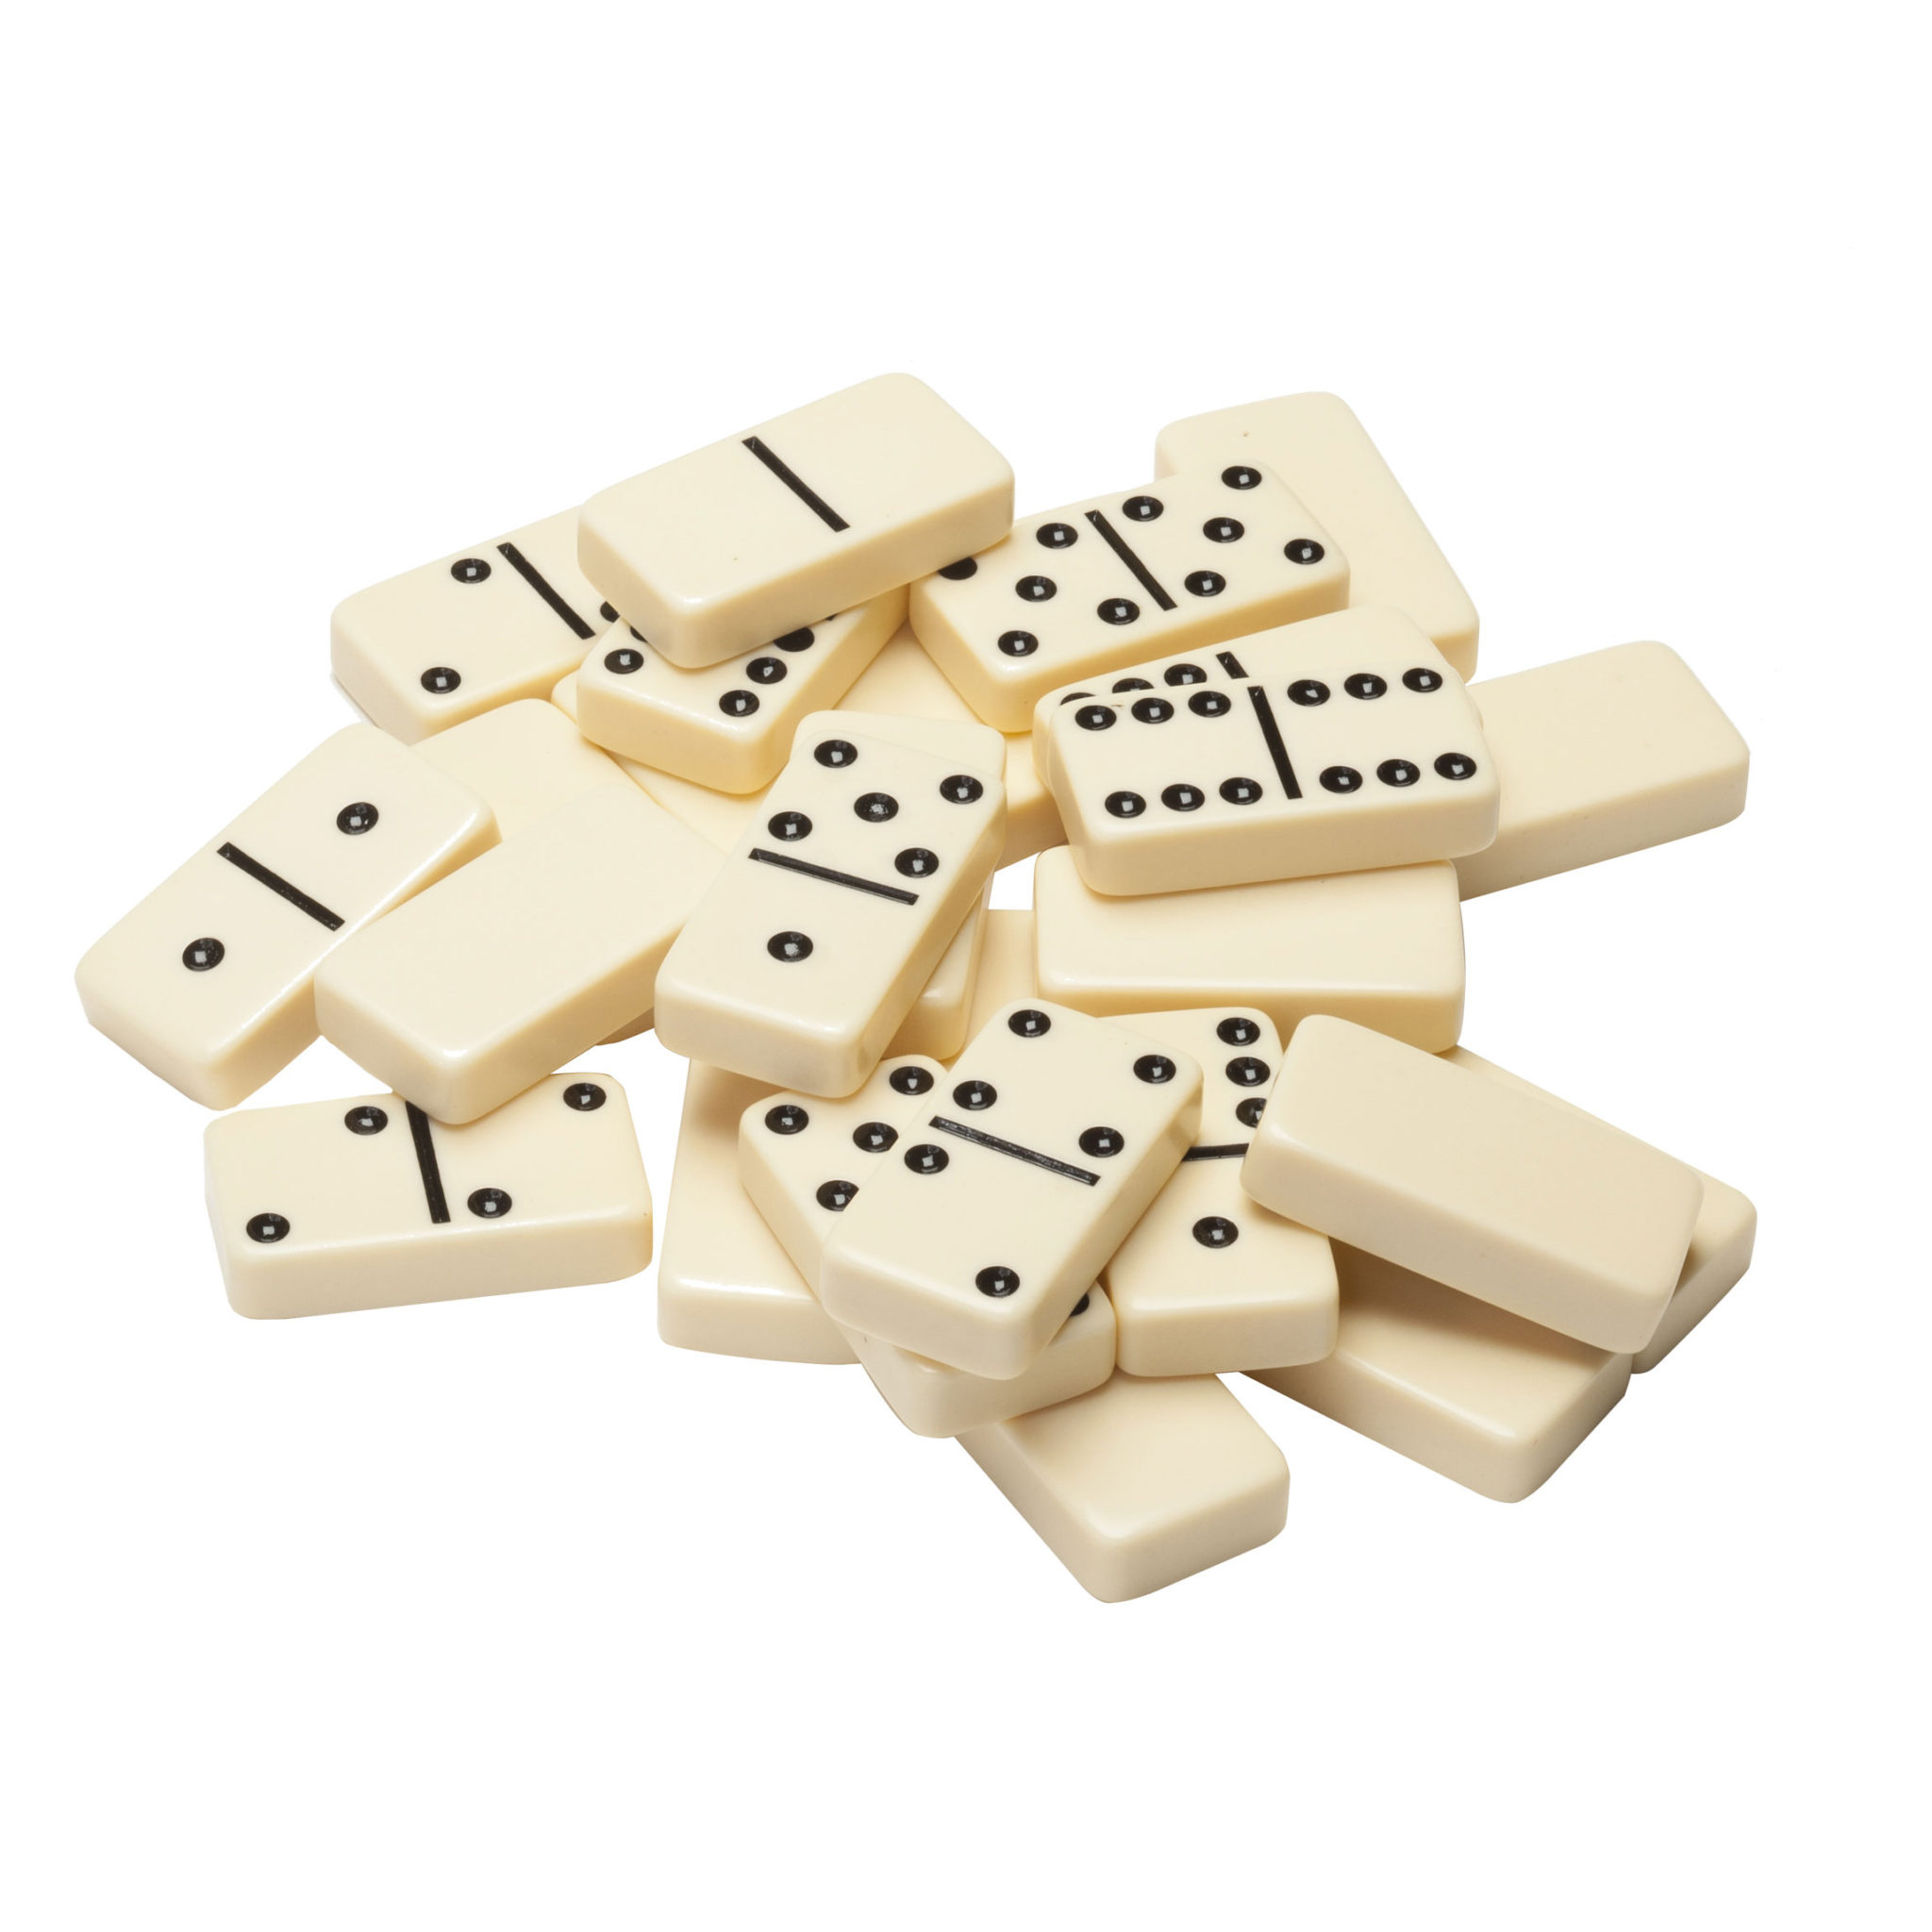 Dominoes: White pieces of tiles, Recreational board game for the whole family, Dice, Double 6. 2050x2050 HD Background.